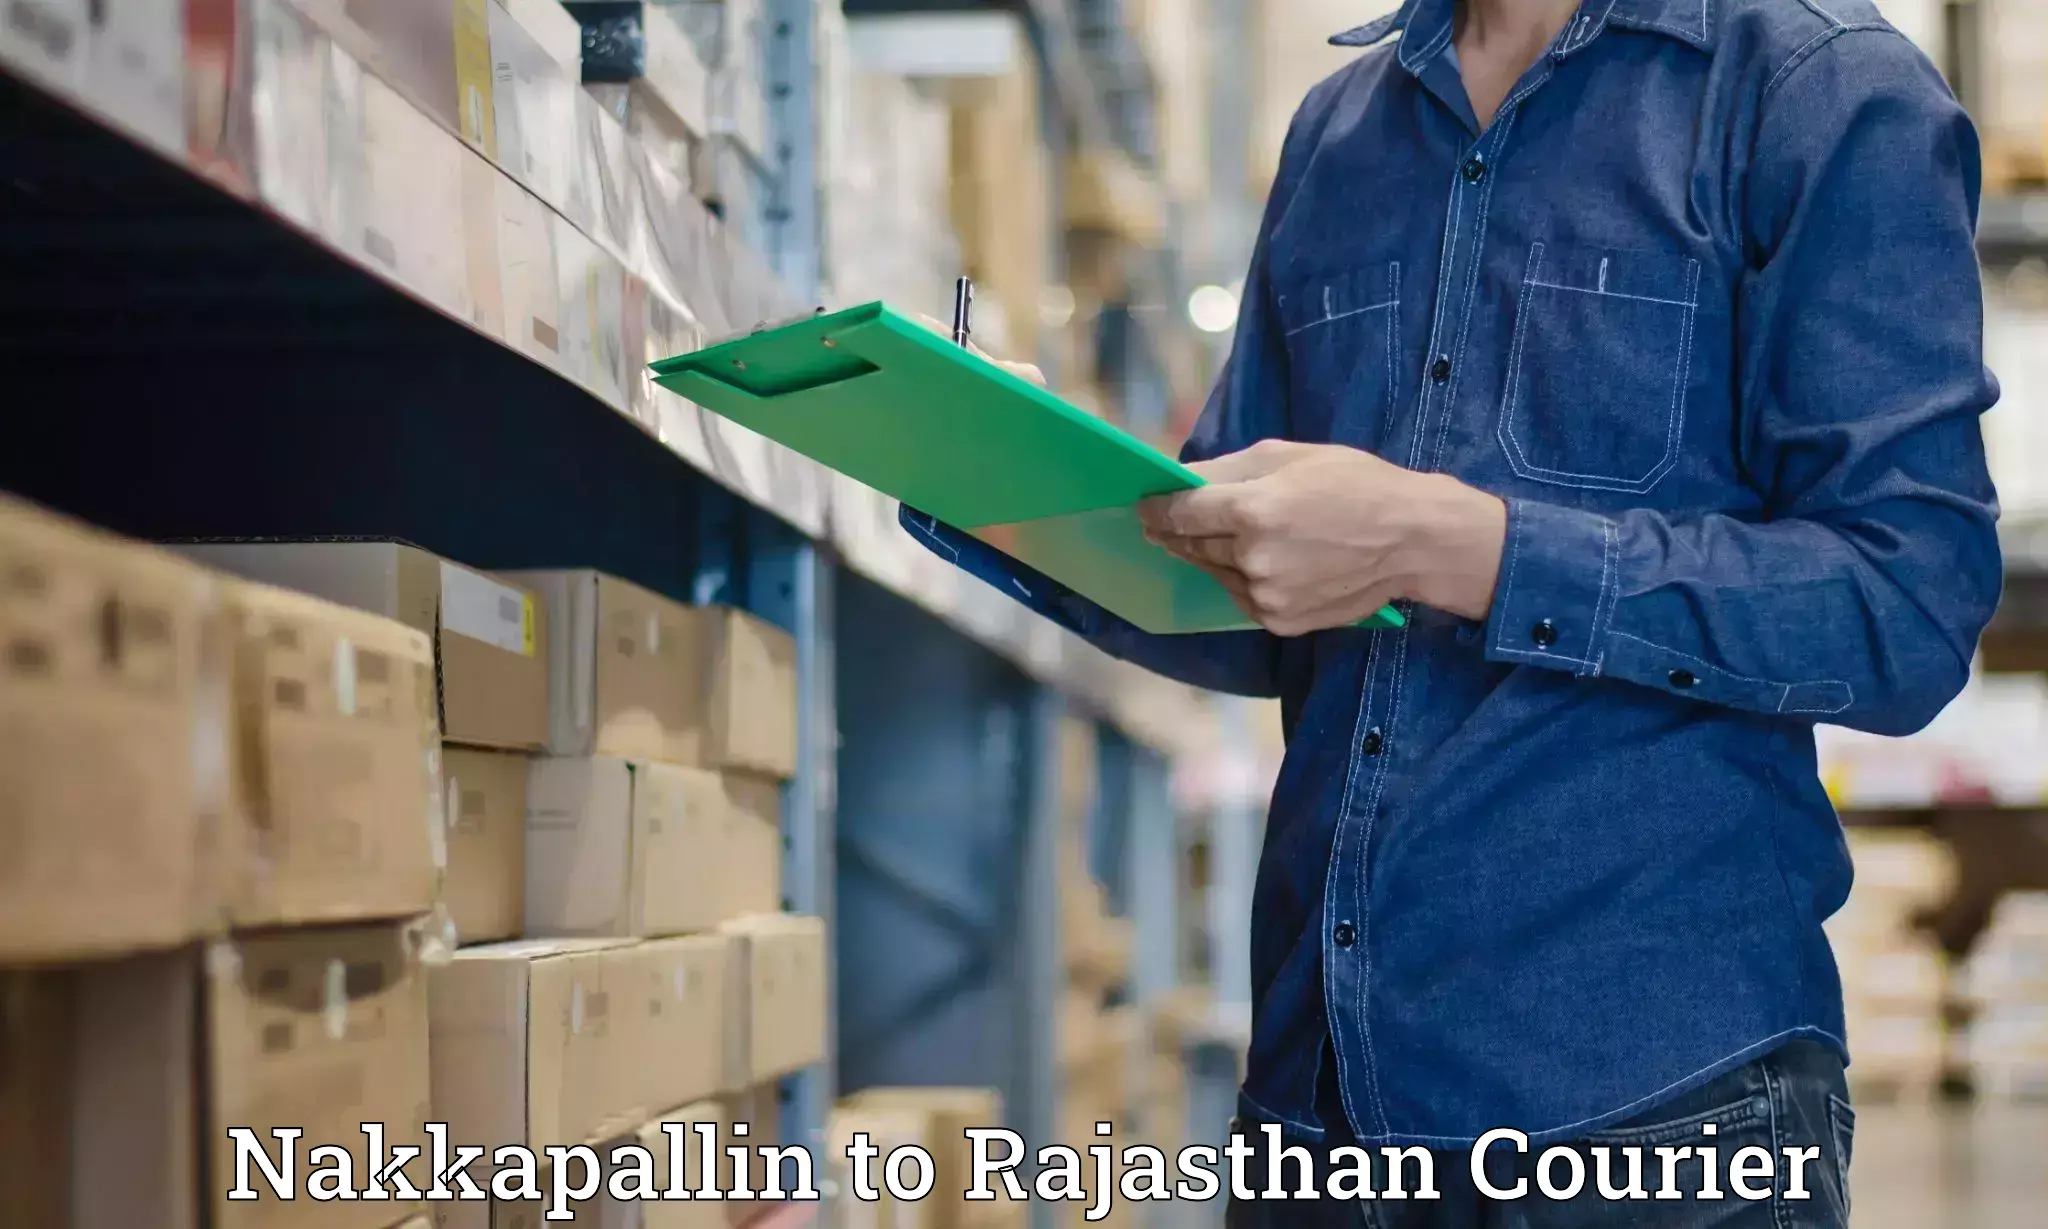 Full-service courier options Nakkapallin to Rajasthan